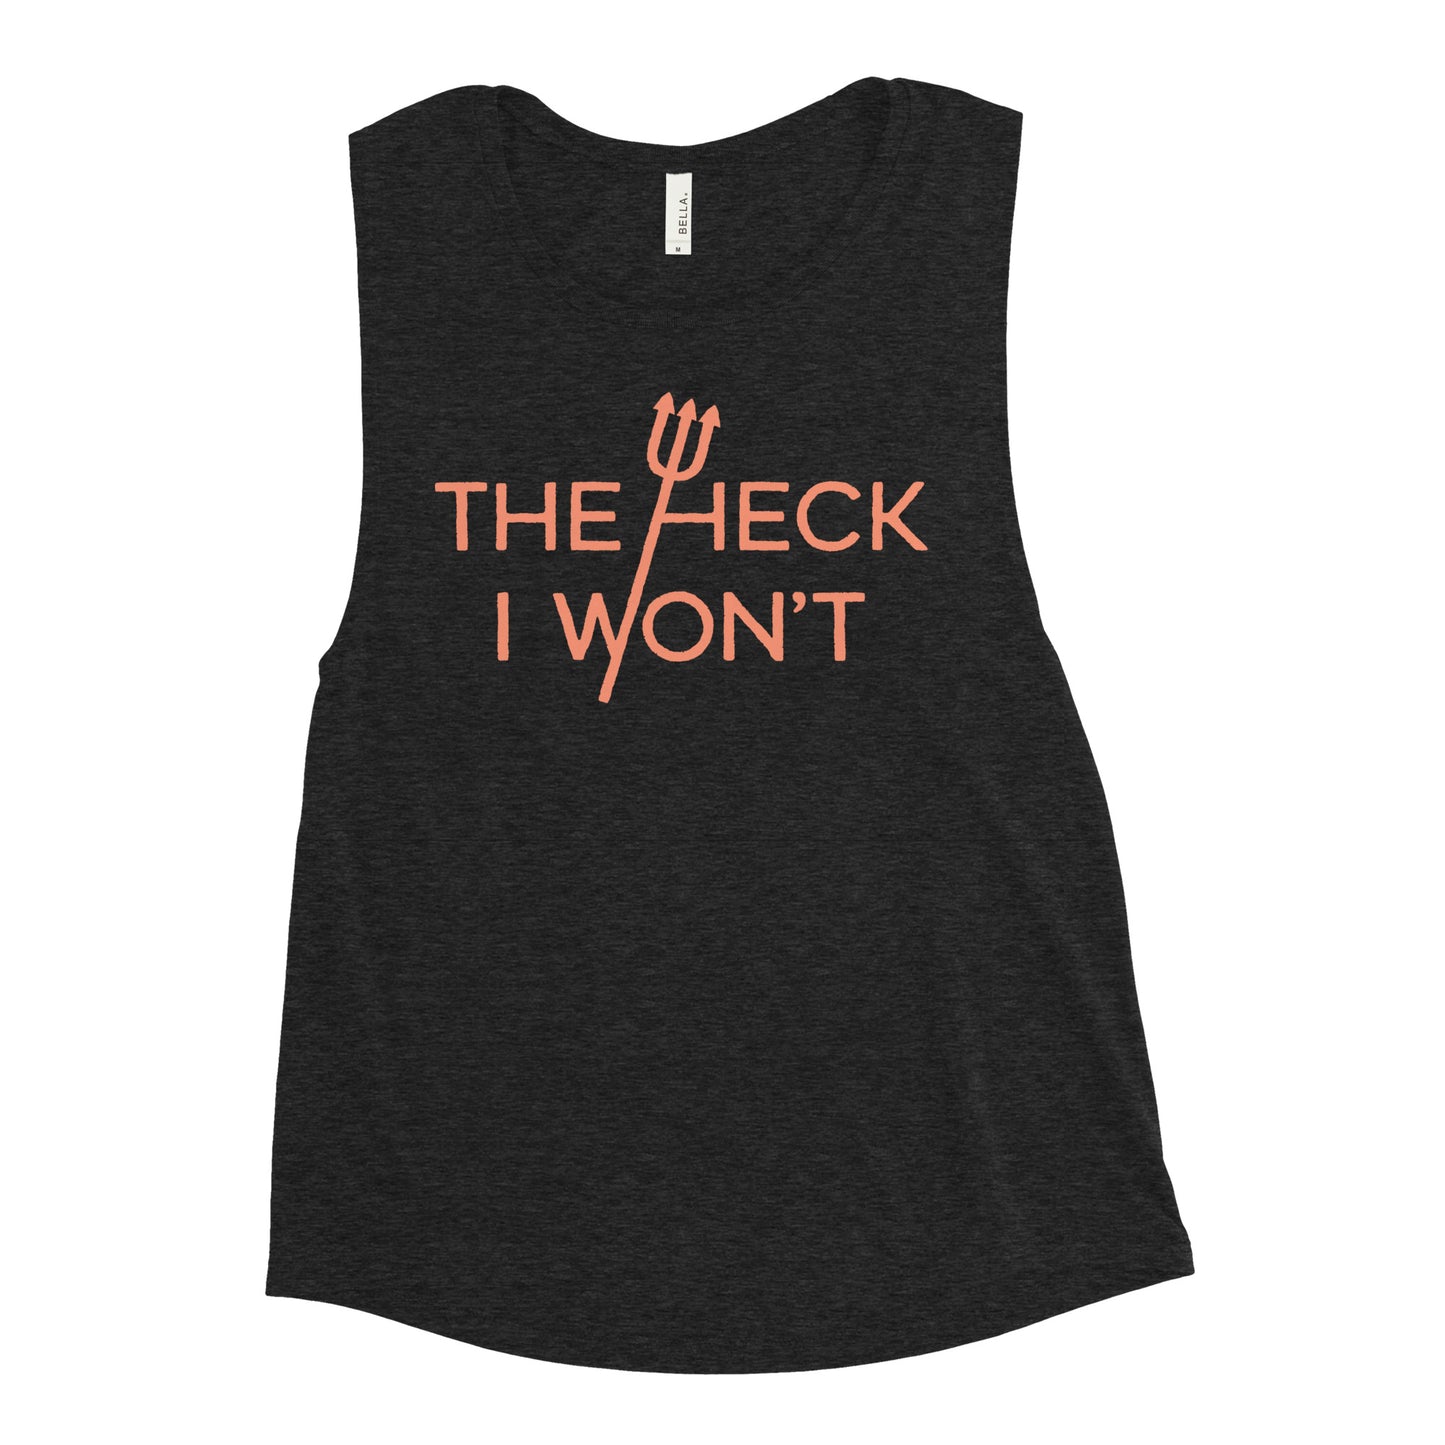 The Heck I Won't Women's Muscle Tank